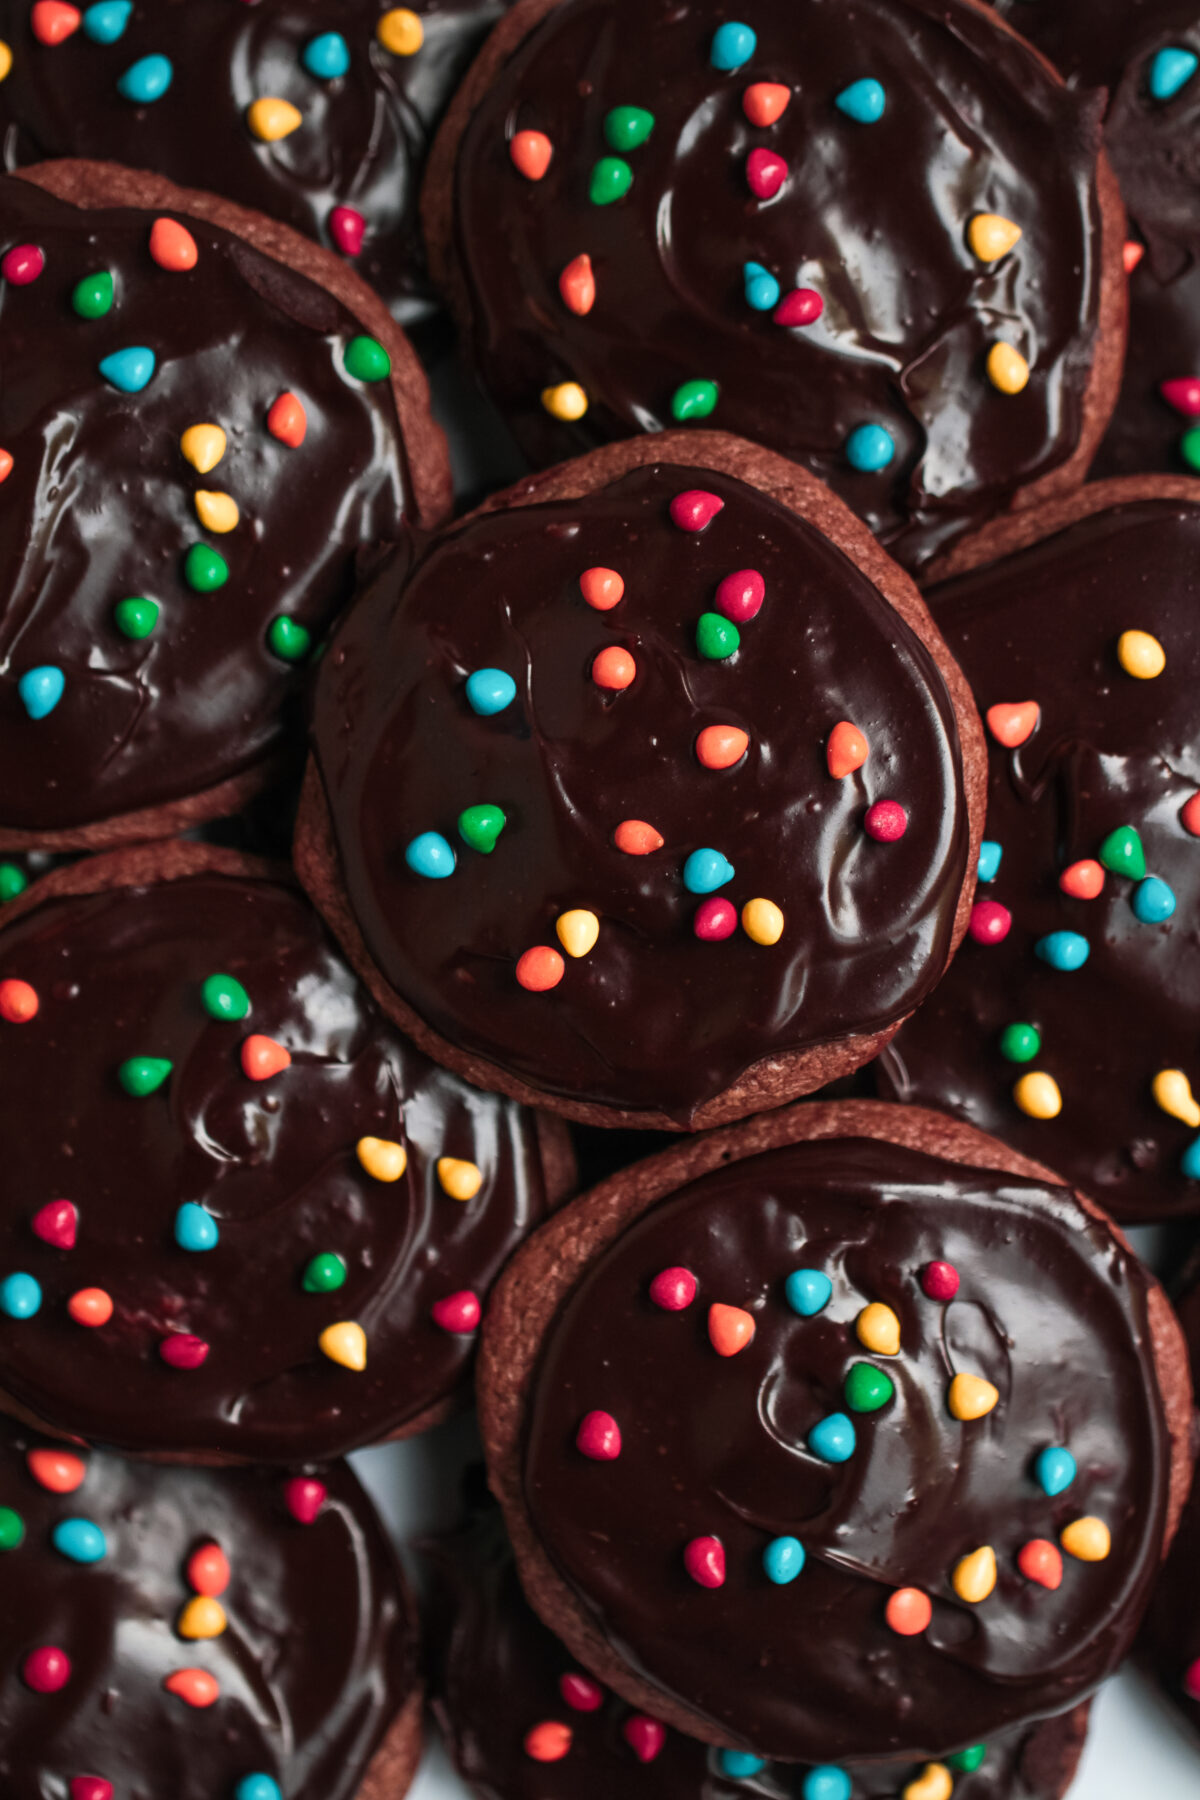 Indulge in nostalgia with Cosmic Brownie Cookies – a classic childhood treat reimagined! Experience the joy of every rich, chocolatey bite!